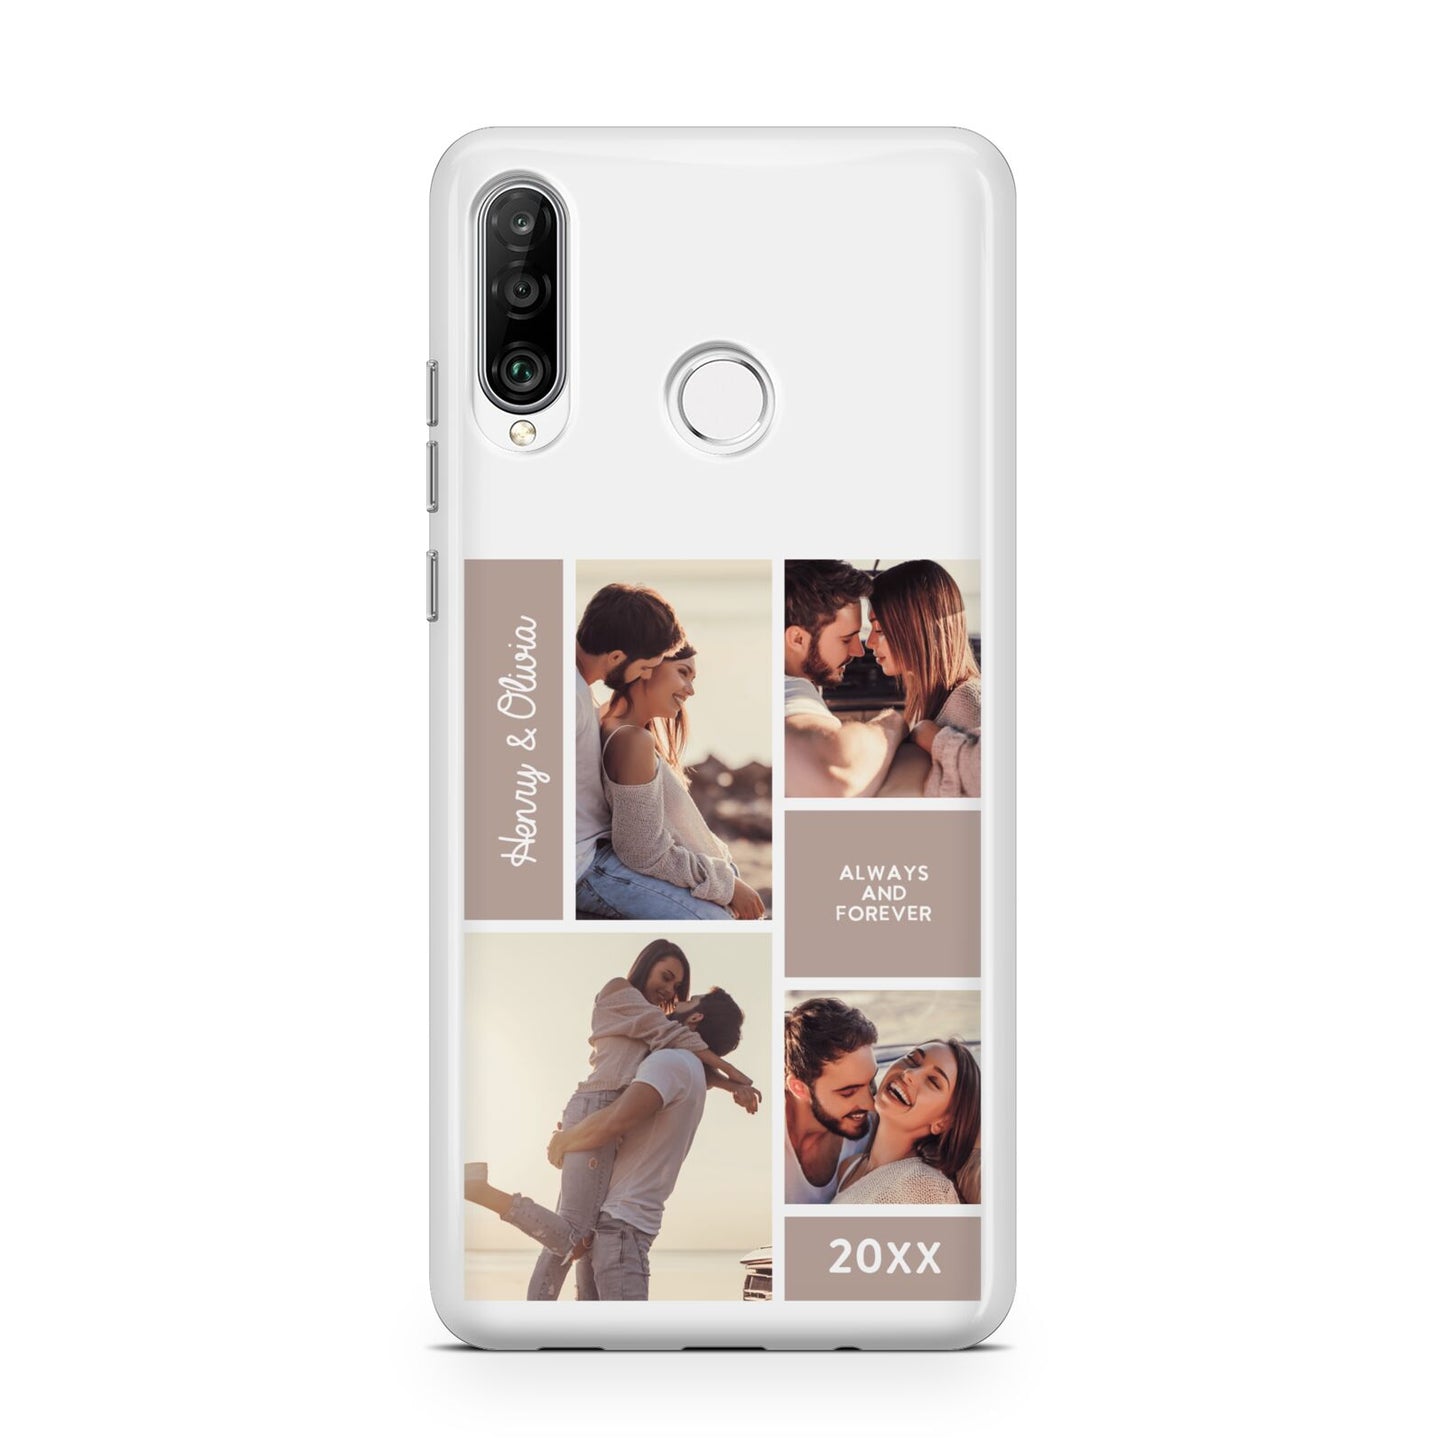 Couples Valentine Photo Collage Personalised Huawei P30 Lite Phone Case